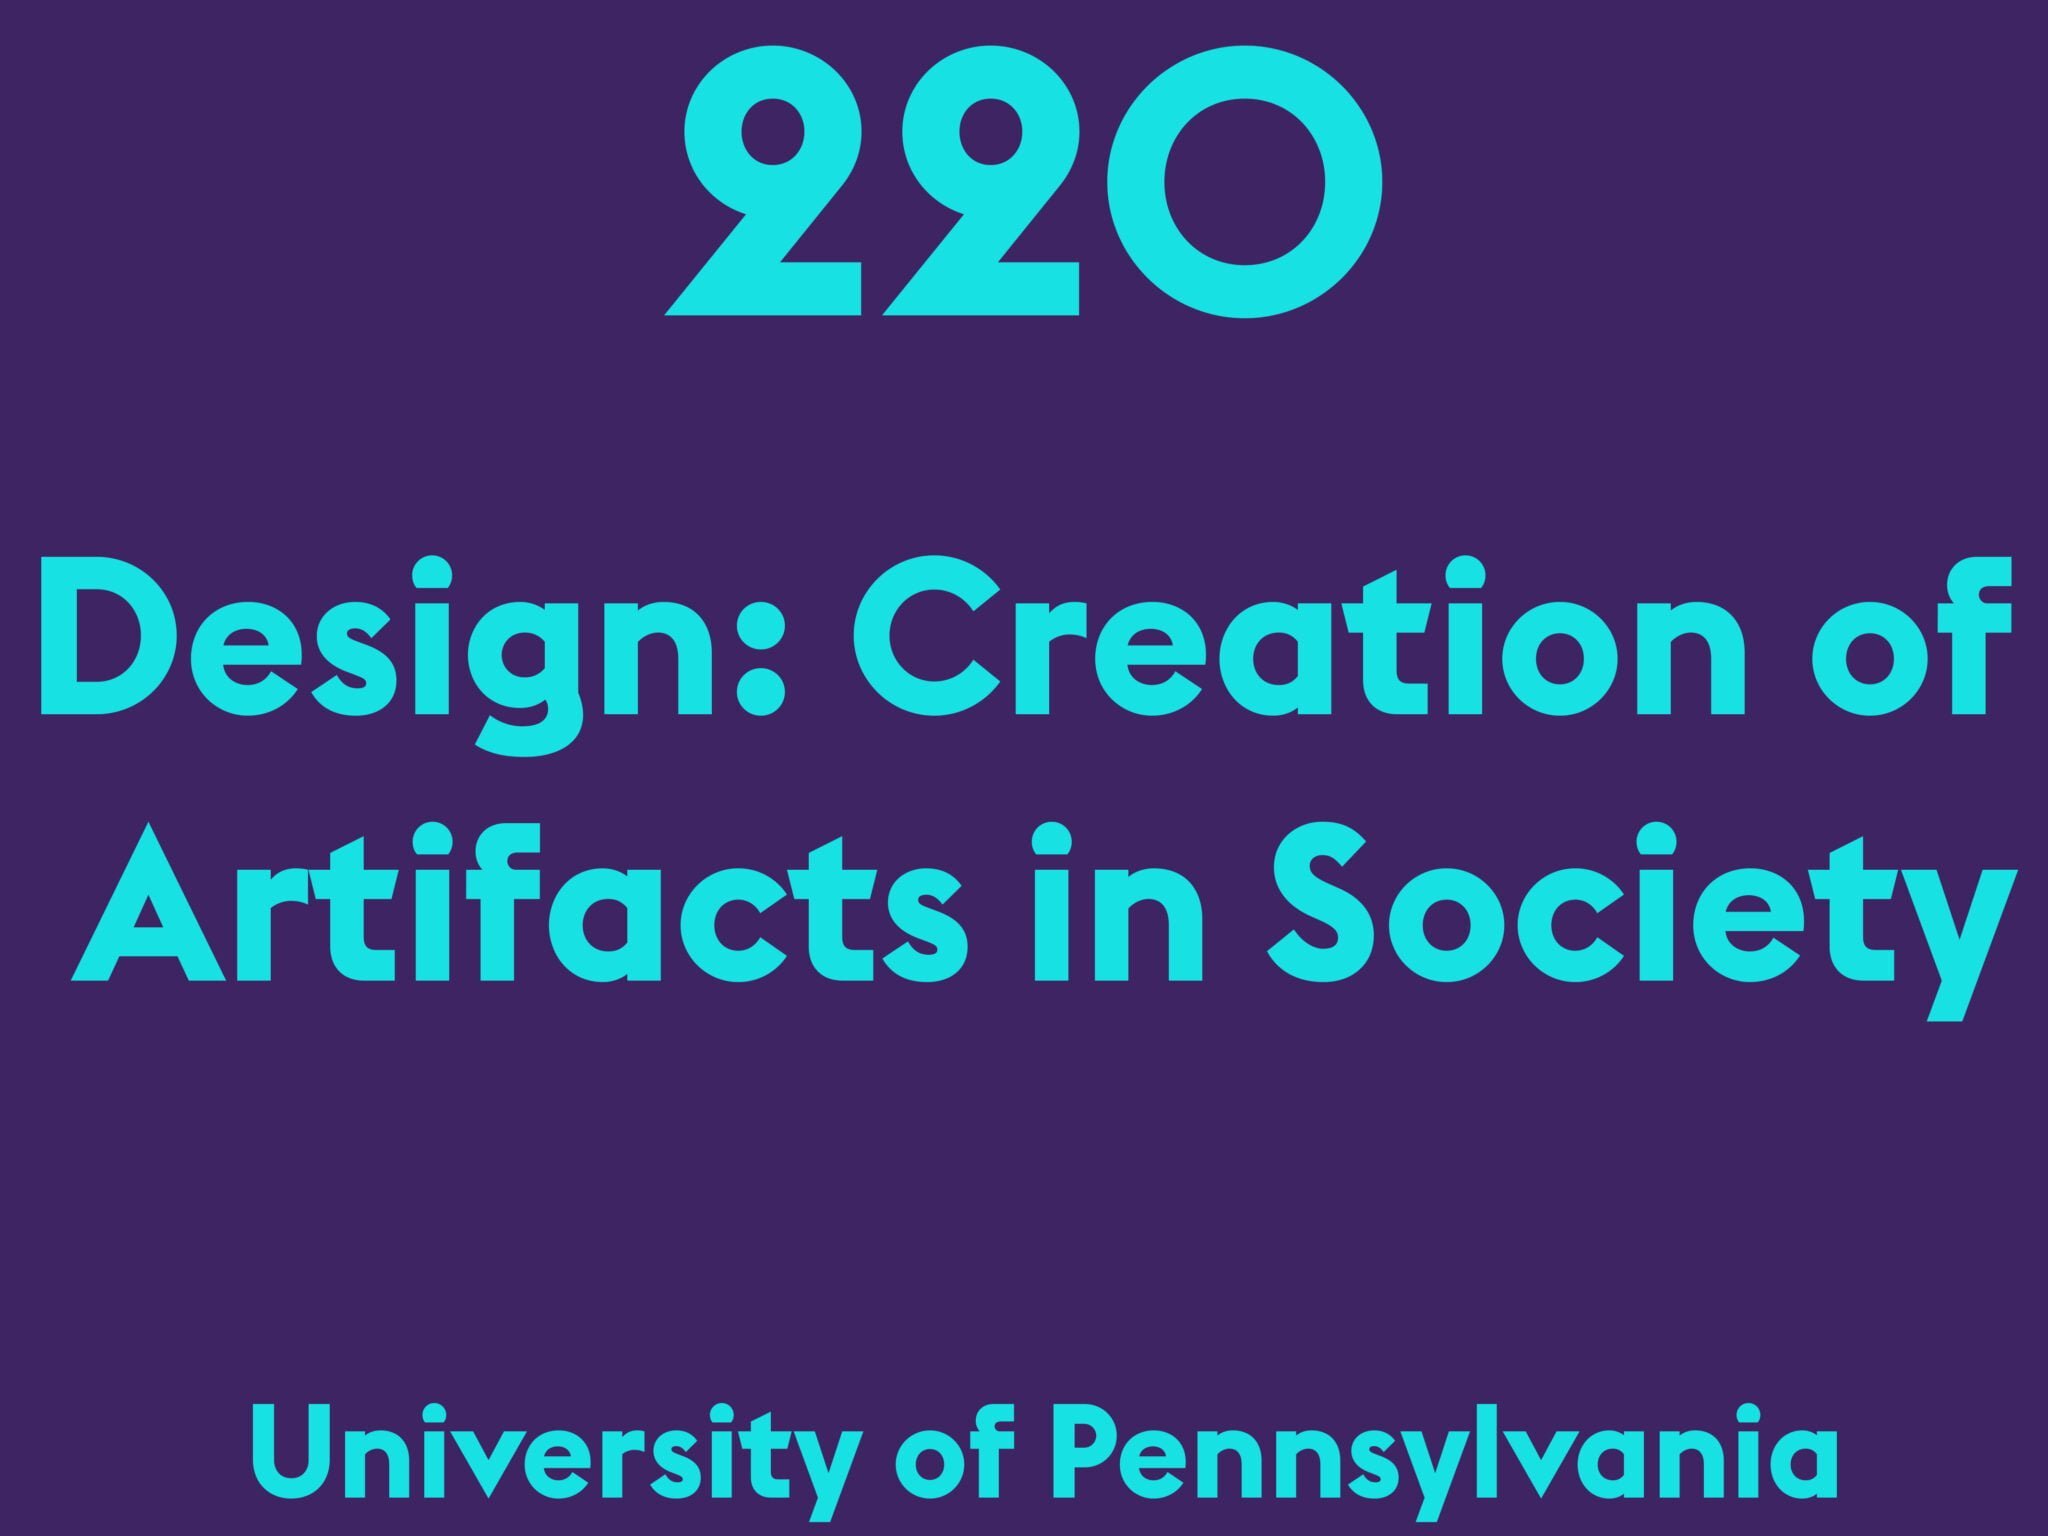 Design: Creation of Artifacts in Society